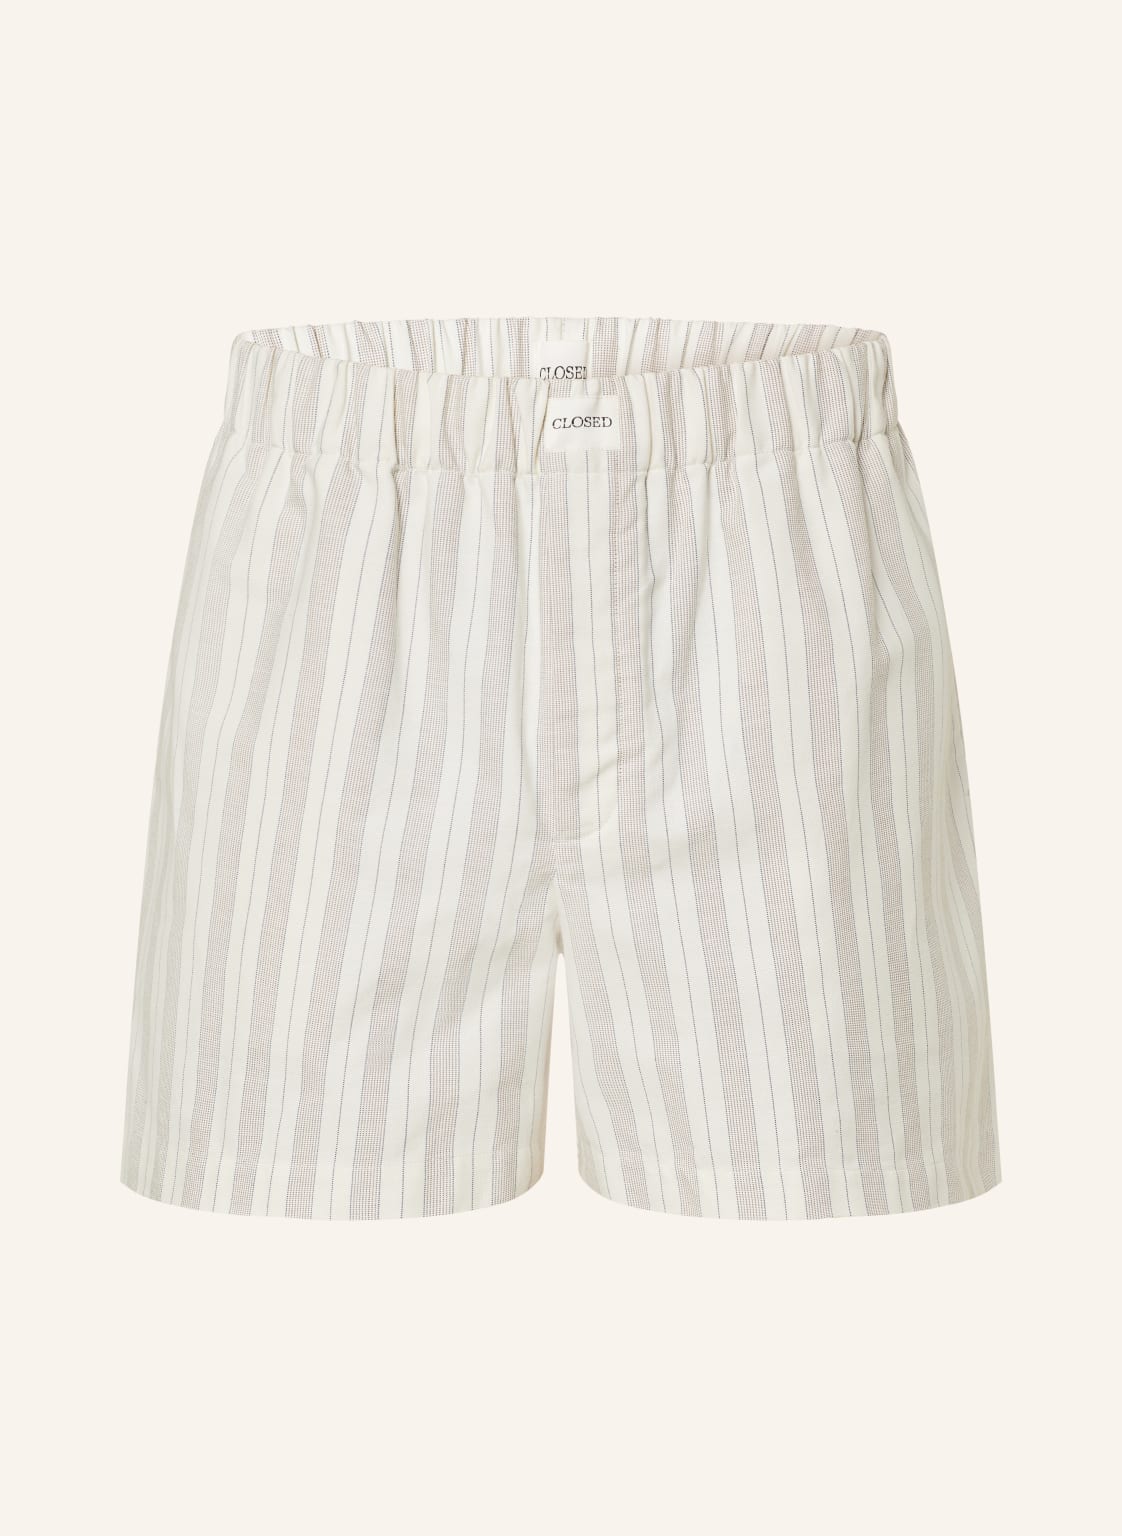 Closed Shorts weiss von closed